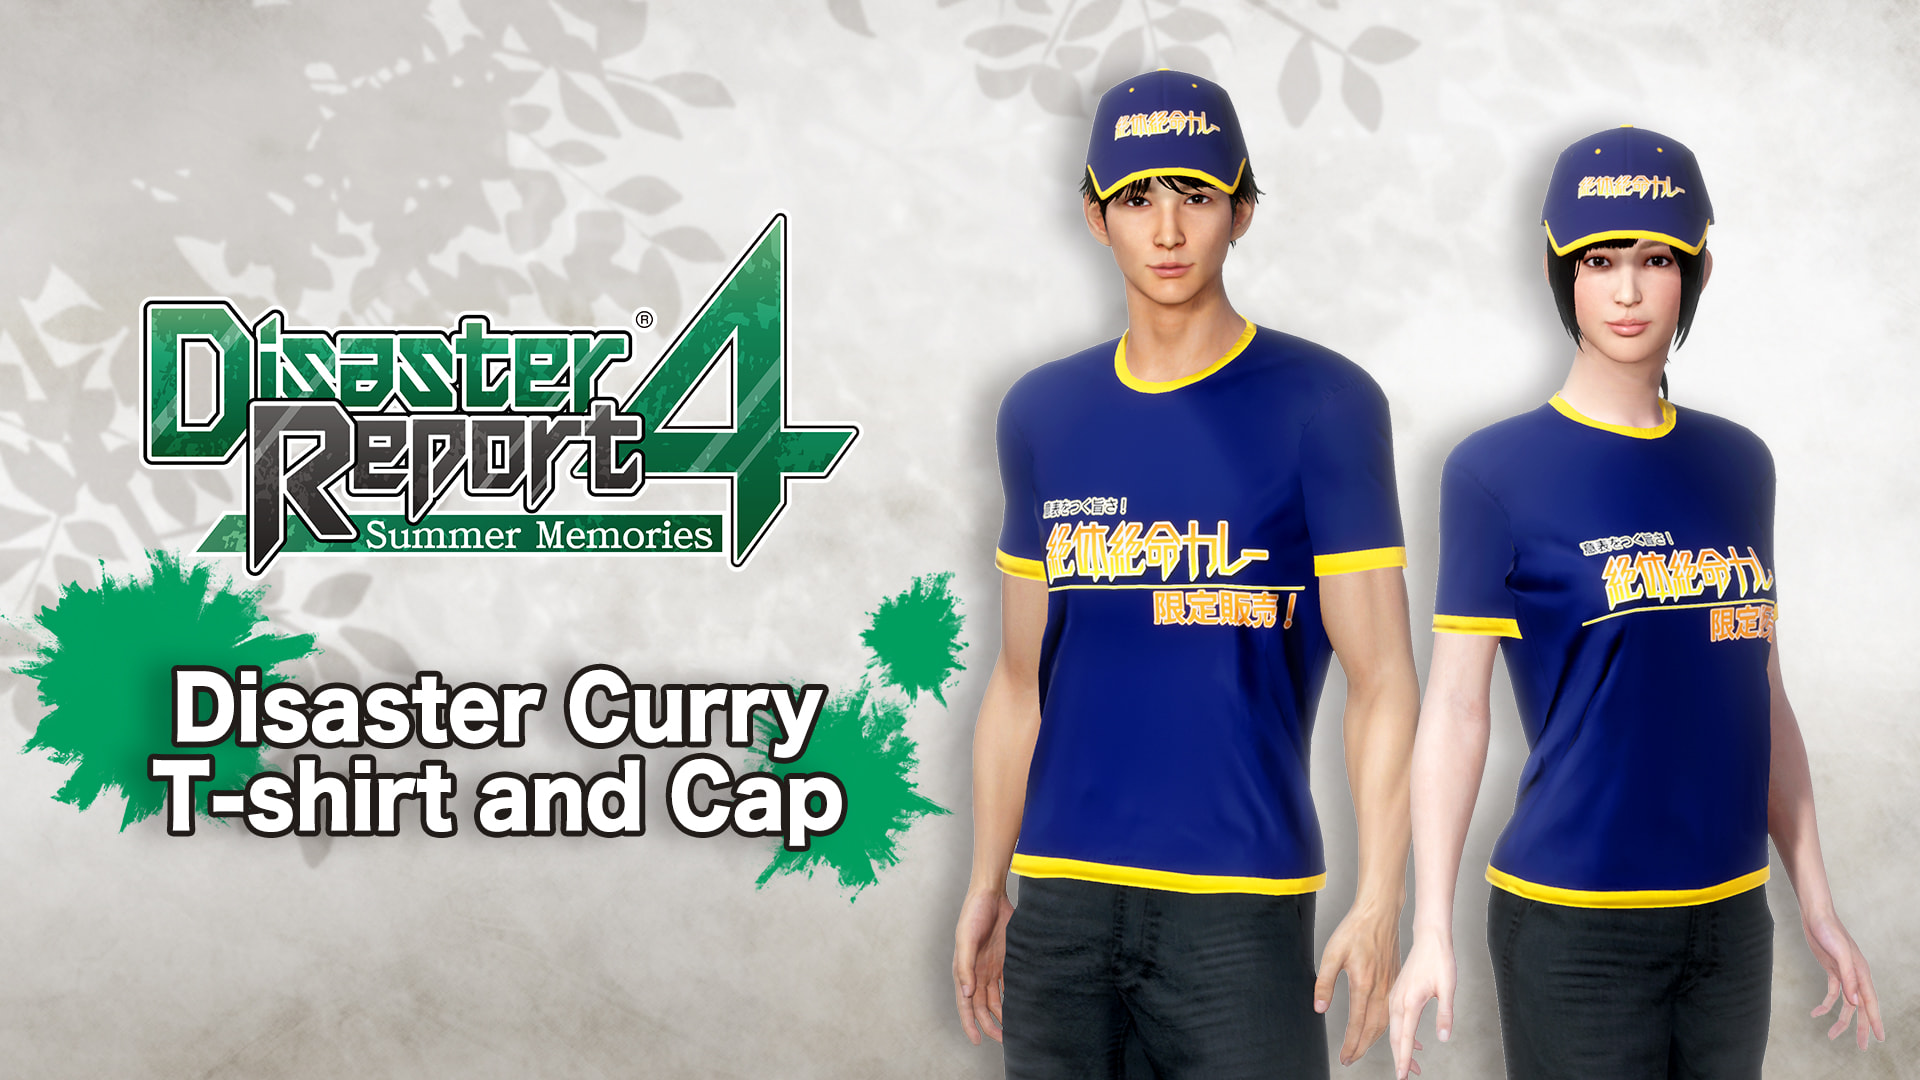 Disaster Report 4 - Disaster Curry T-shirt and Cap